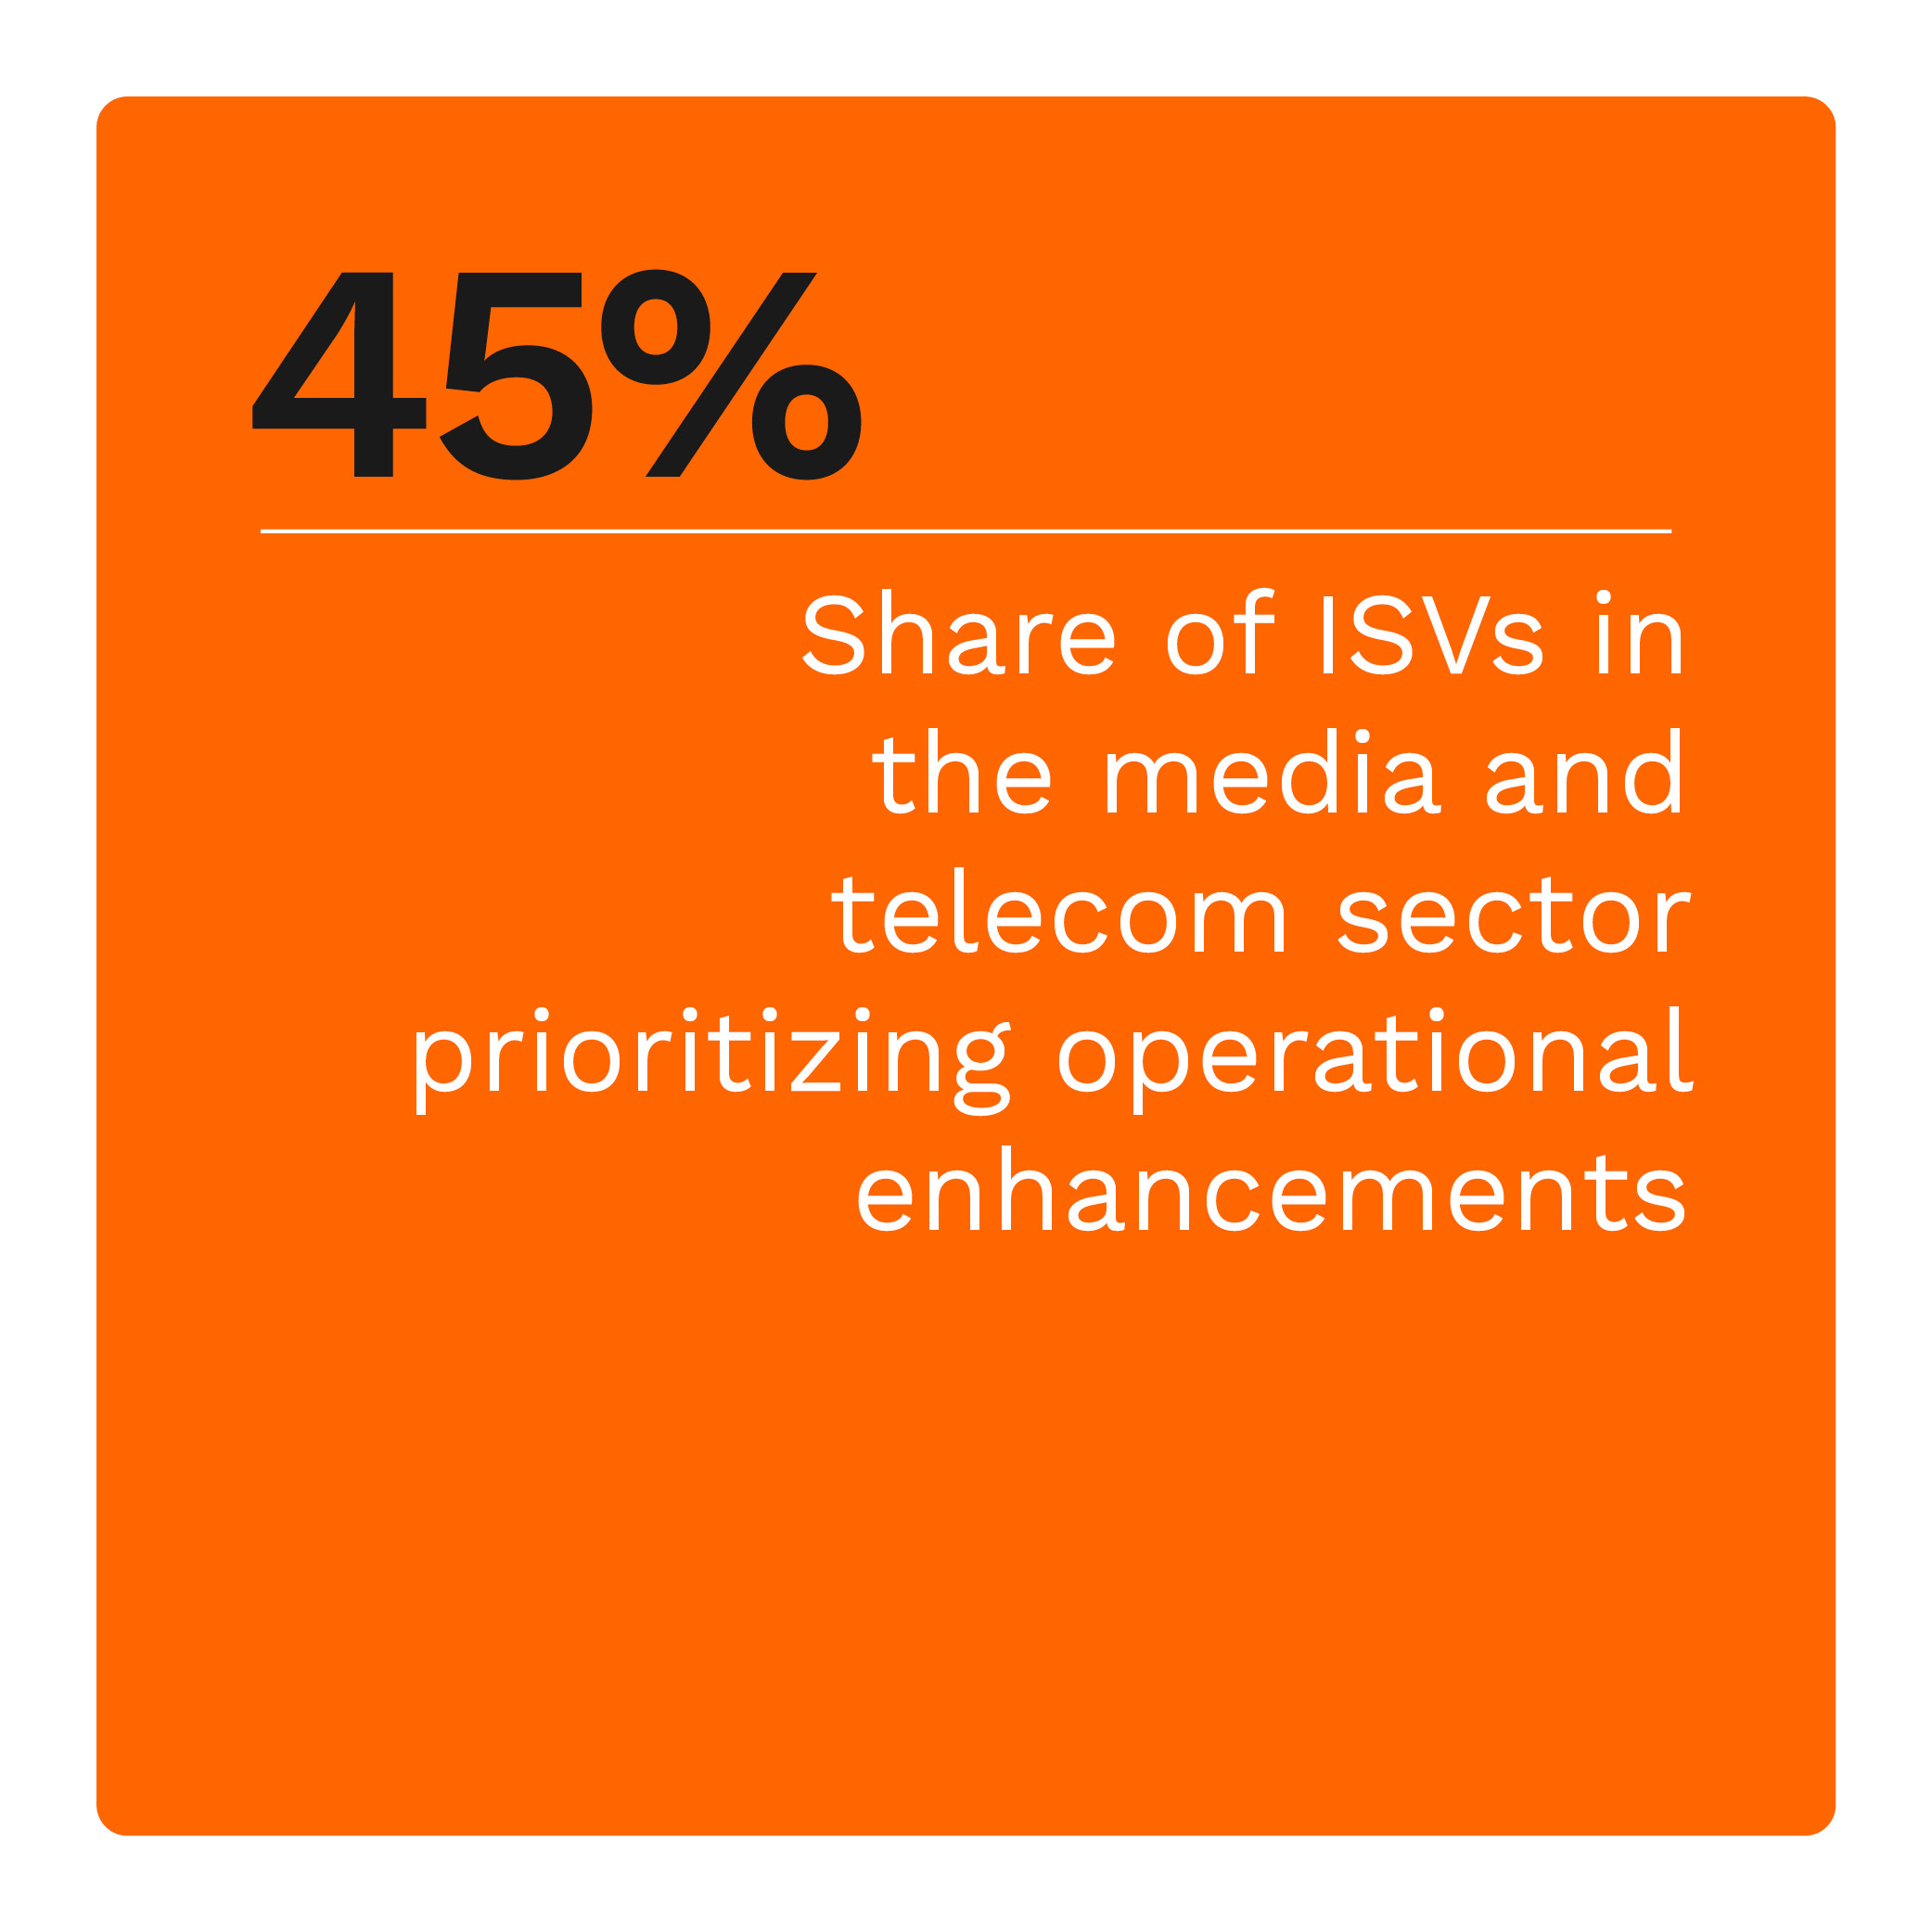  Share of ISVs in the media and telecom sector prioritizing operational enhancements